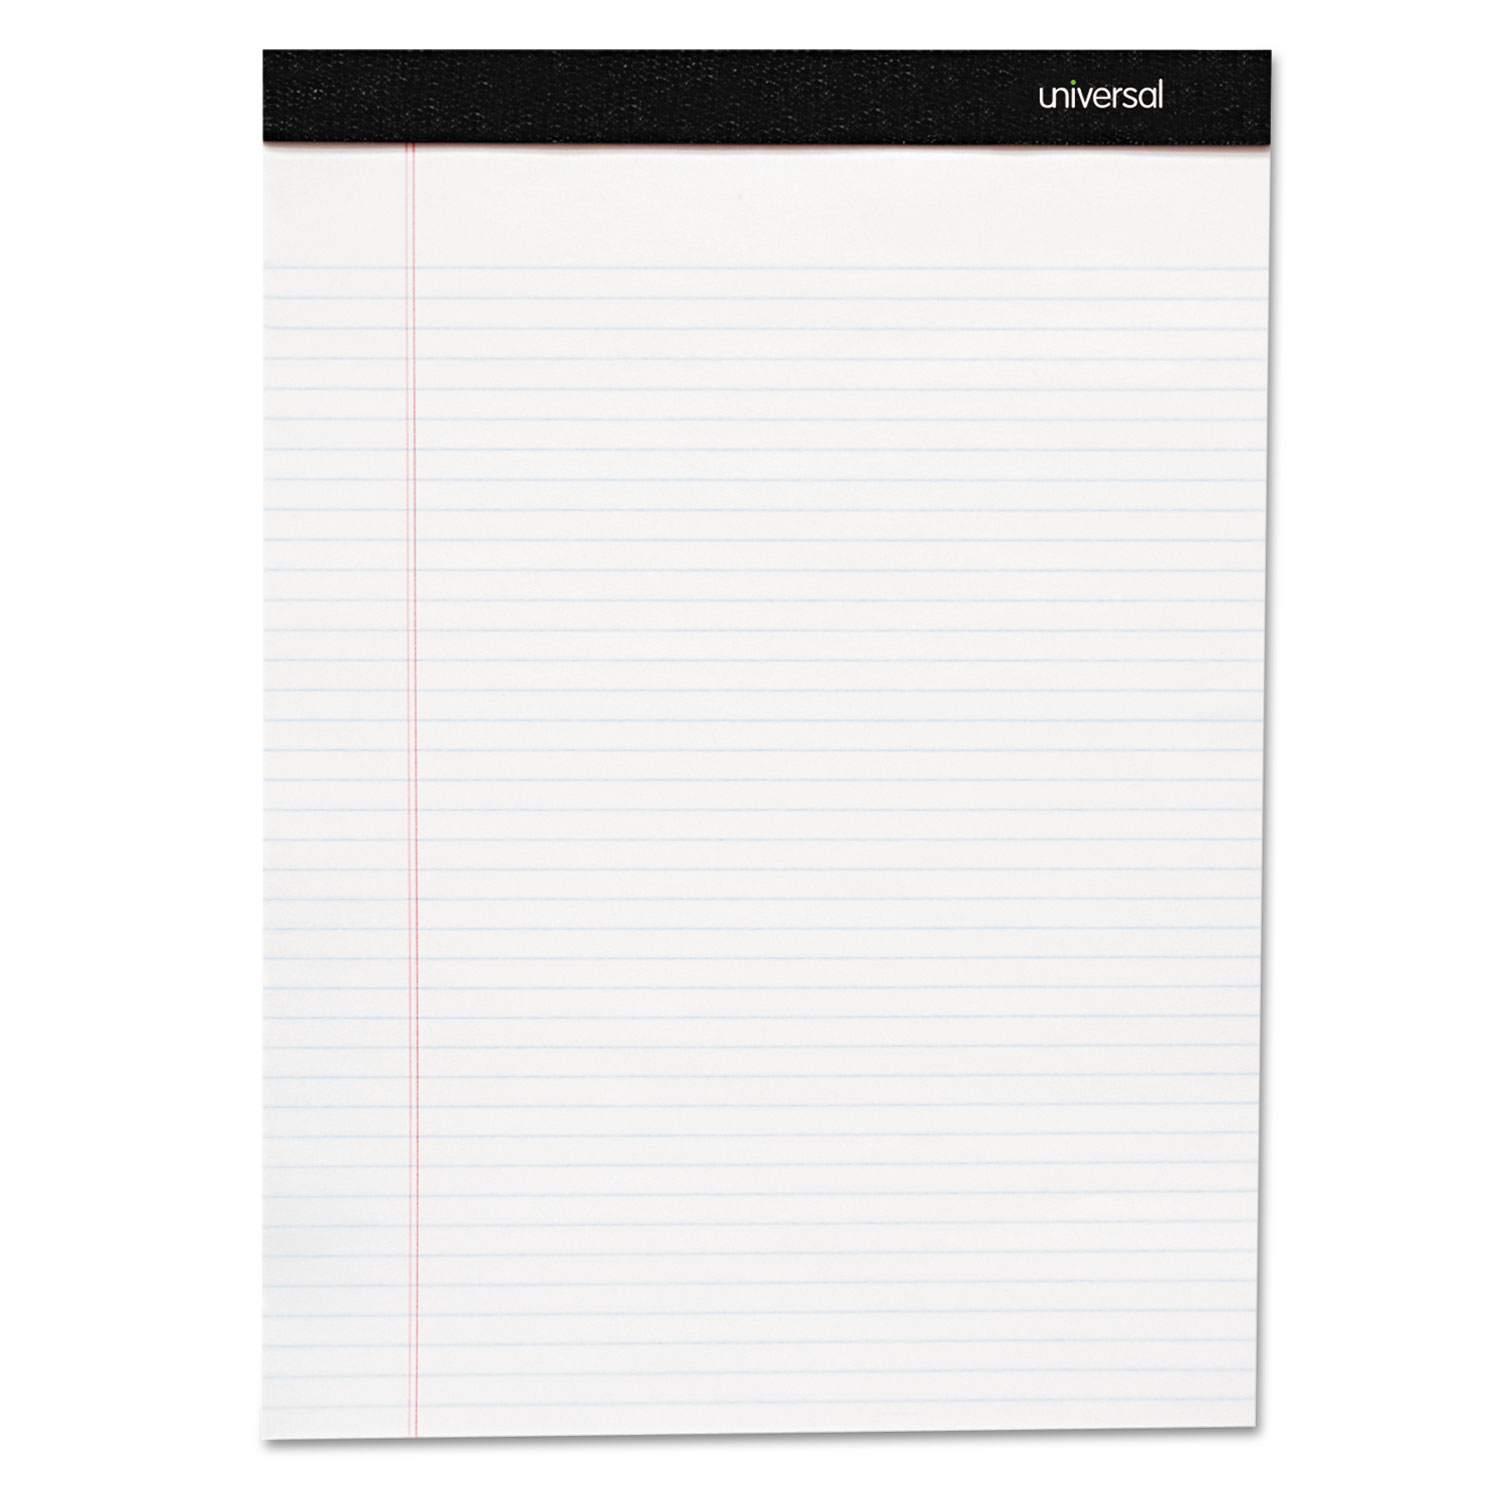  Universal UNV30630 Premium Ruled Writing Pads, Wide/Legal Rule, 8.5 x 11, White, 50 Sheets, 6/Pack (UNV30630) 